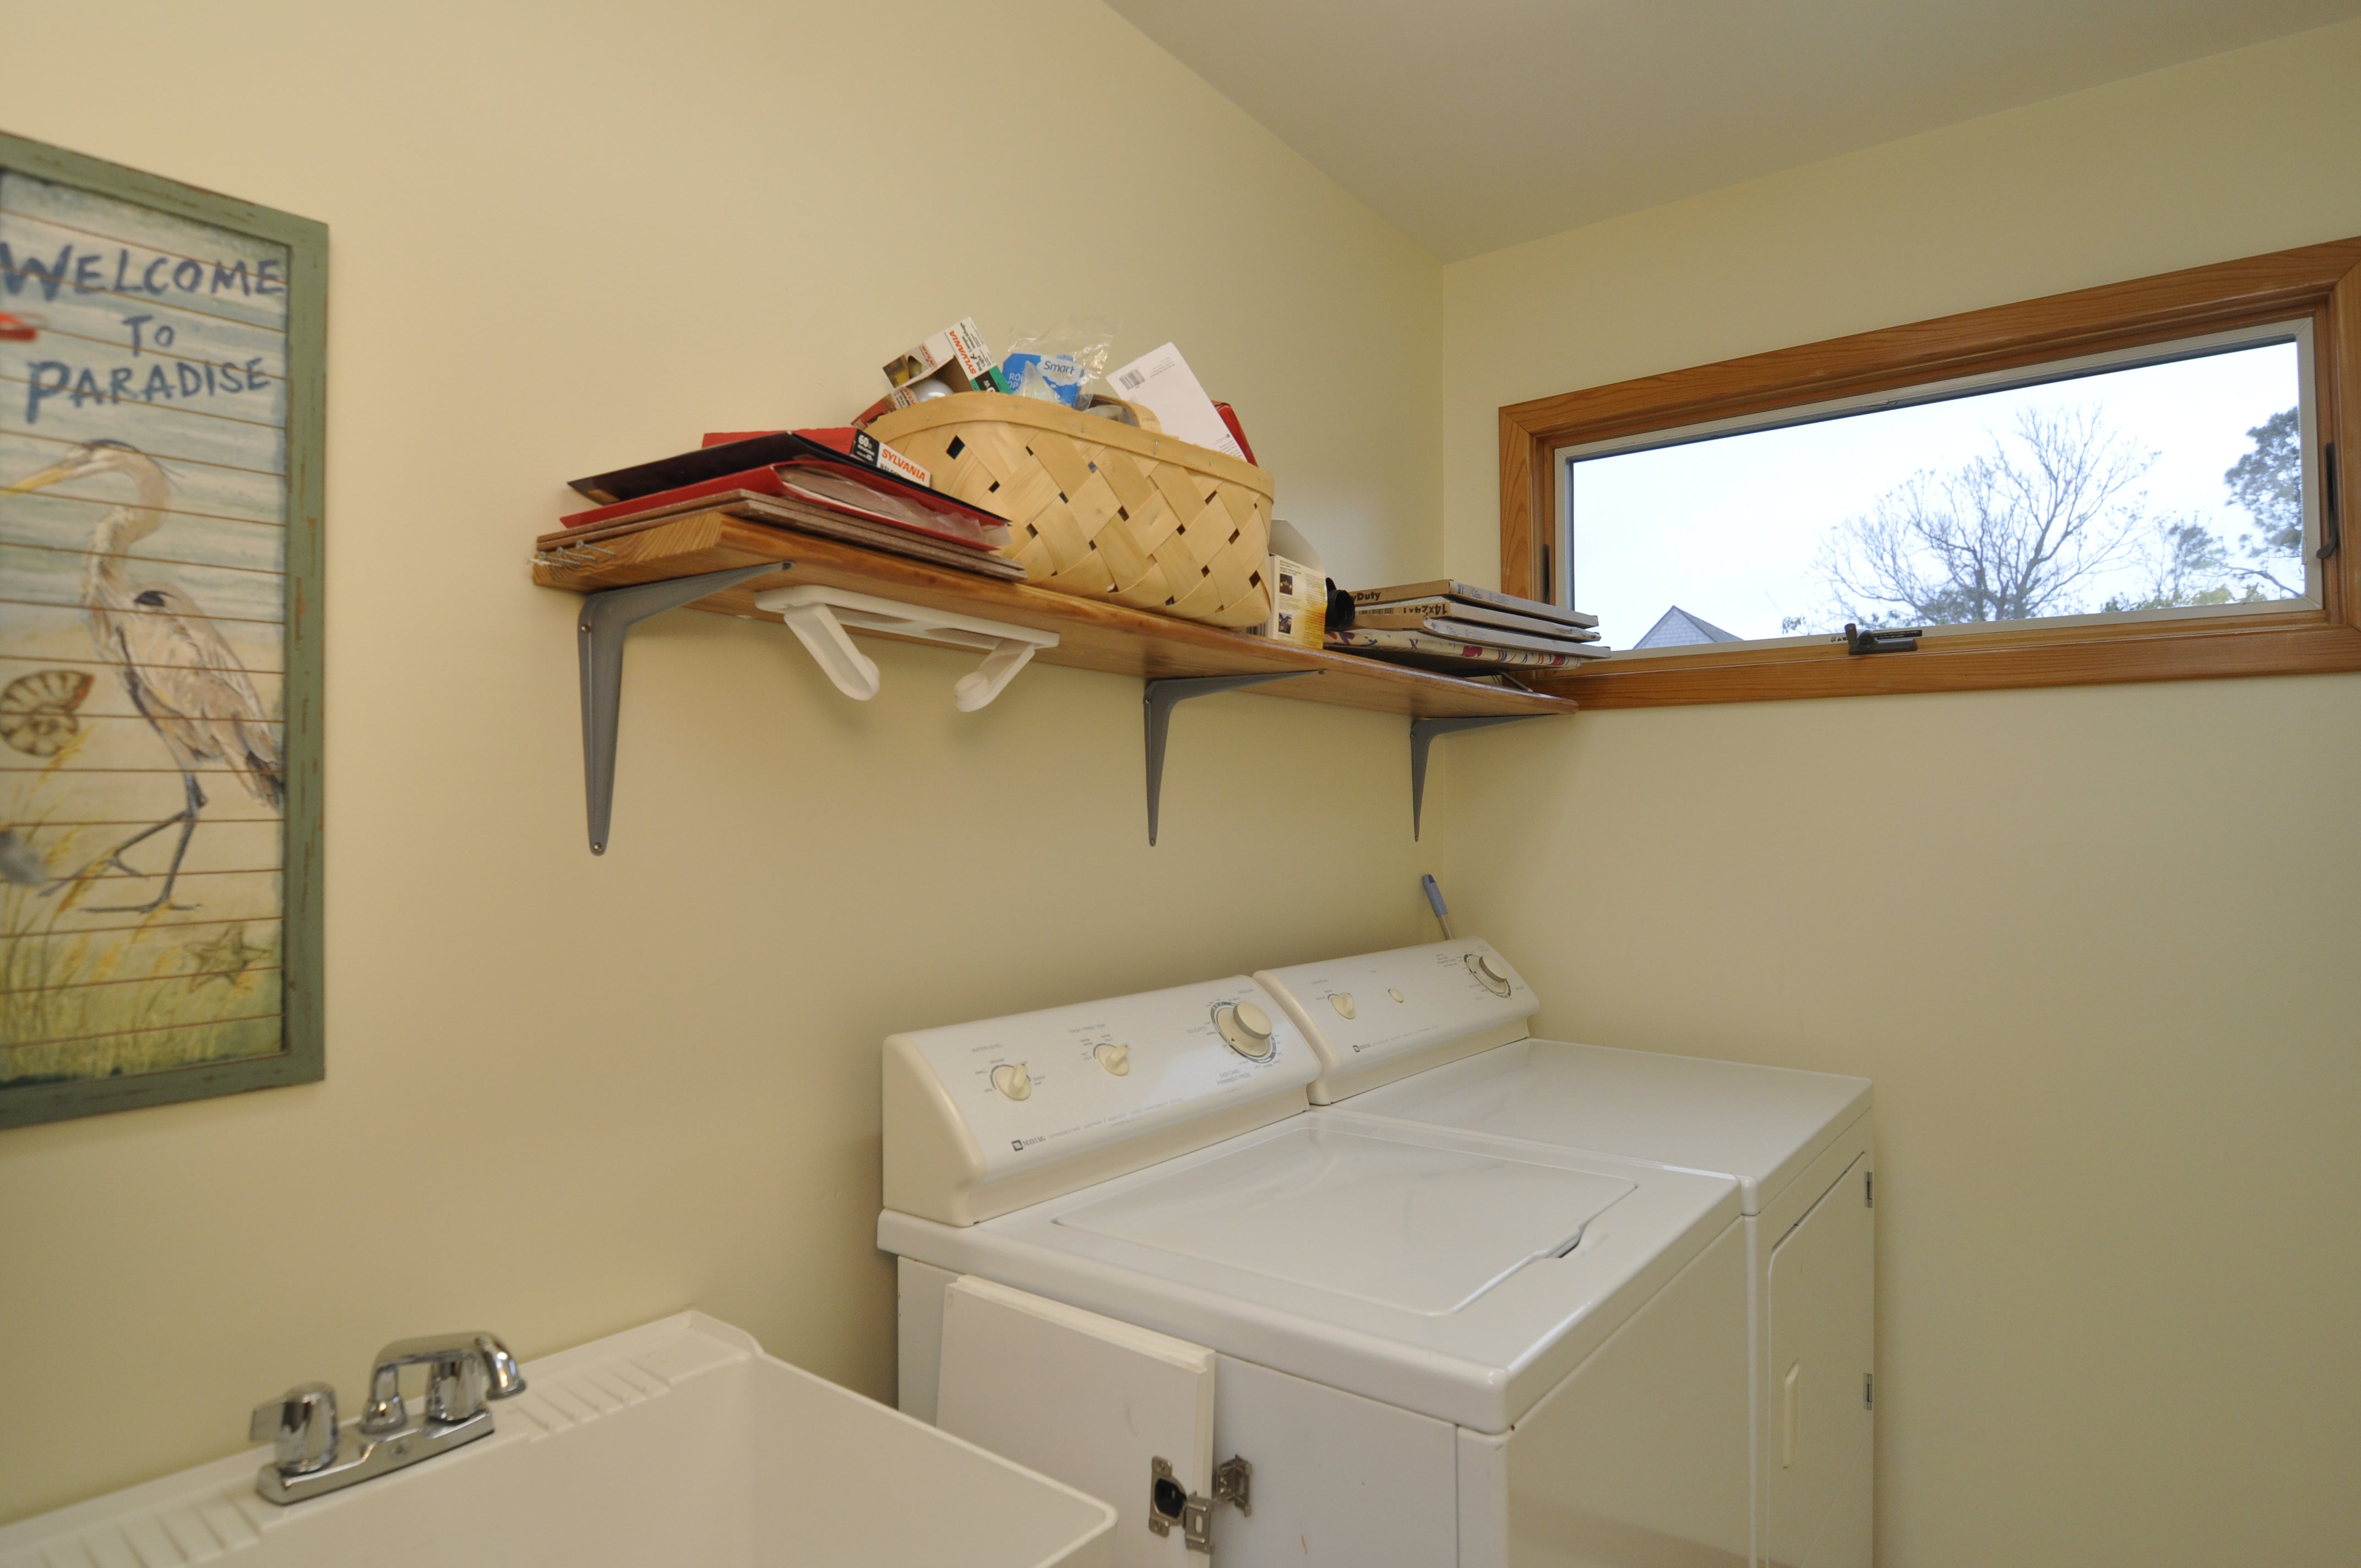 Laundry Room, First Floor